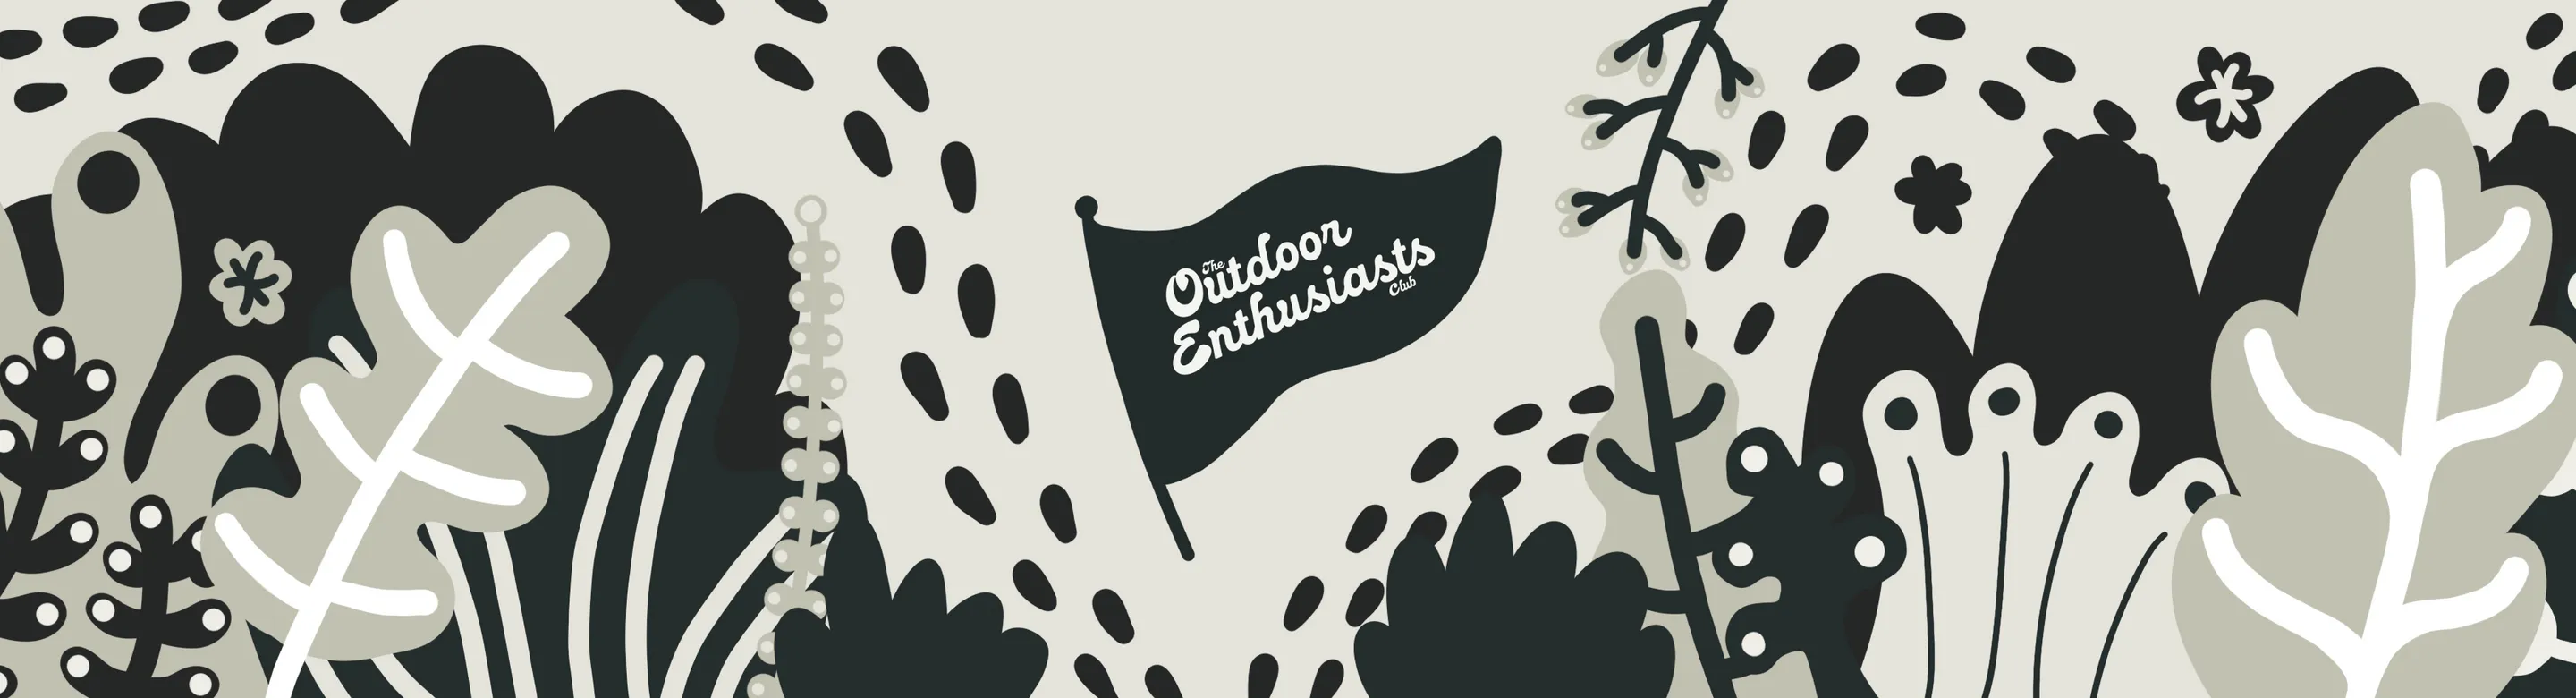 The Outdoor Enthusiasts Club